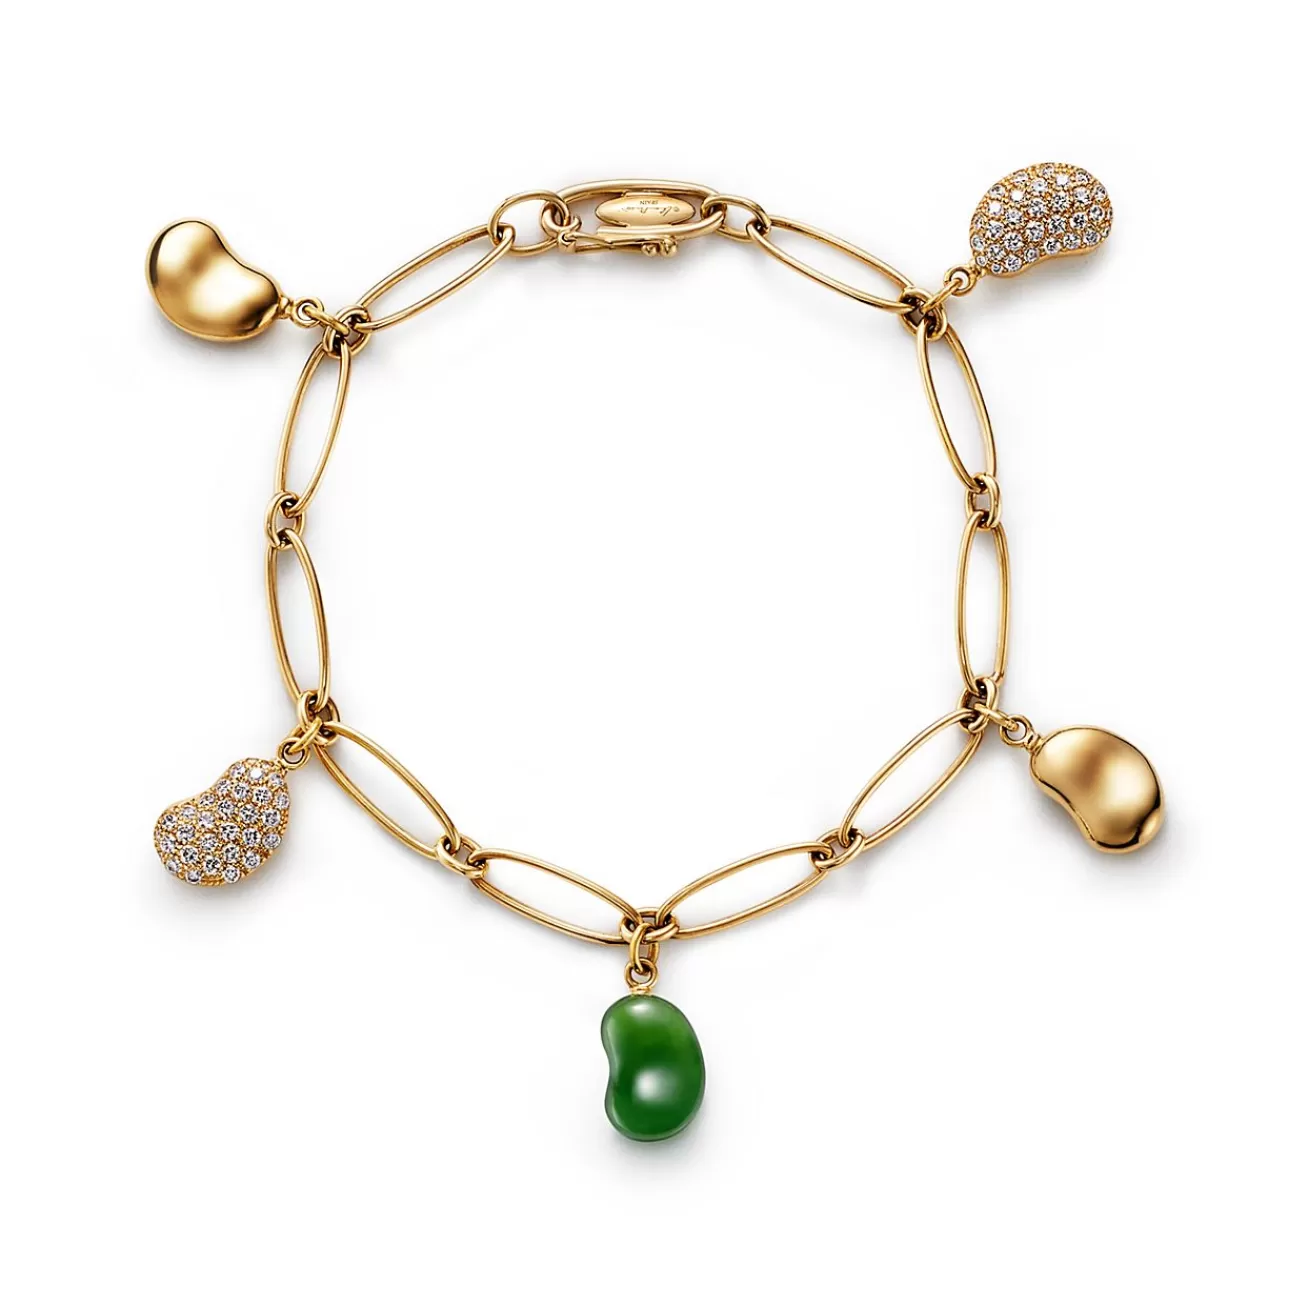 Tiffany & Co. Elsa Peretti® Bean® design Bracelet in Yellow Gold with Diamonds and Green Jade | ^ Bracelets | Gold Jewelry